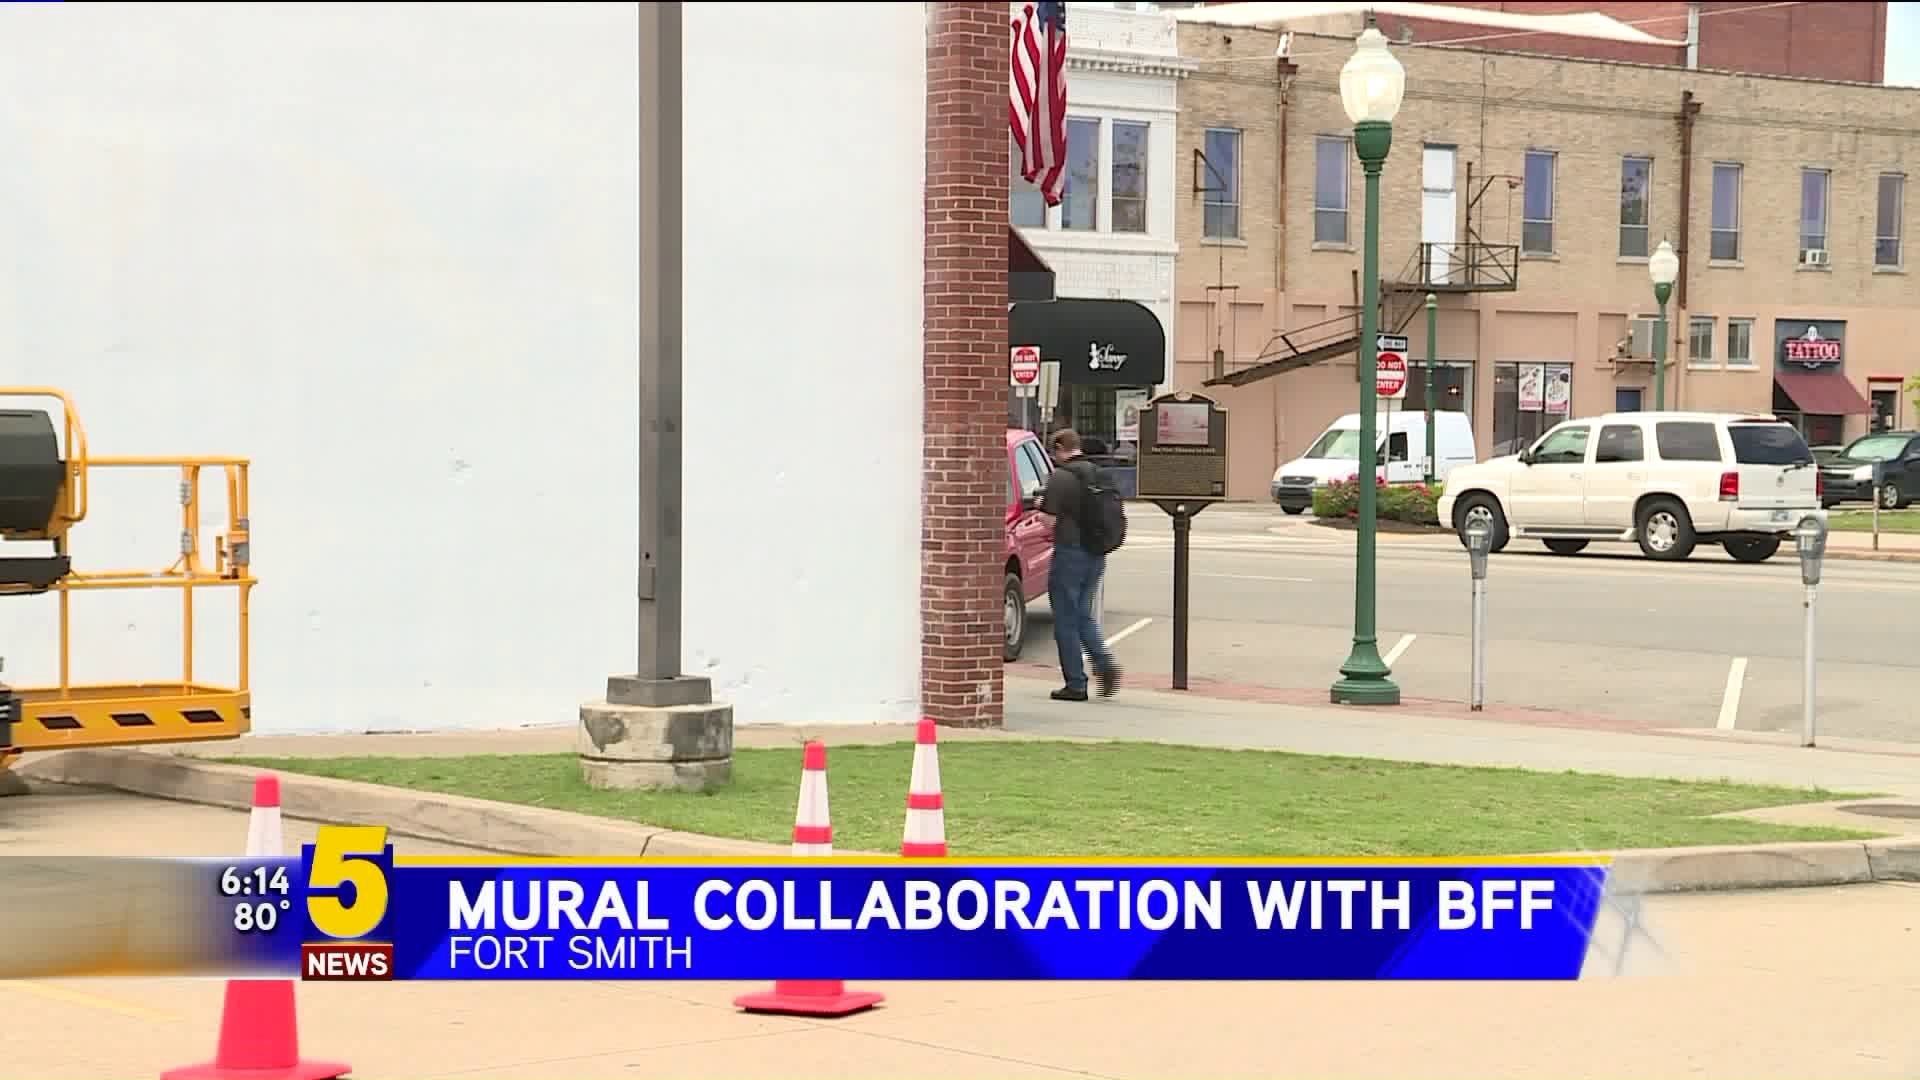 Fort Smith Mural Collaboration with BFF